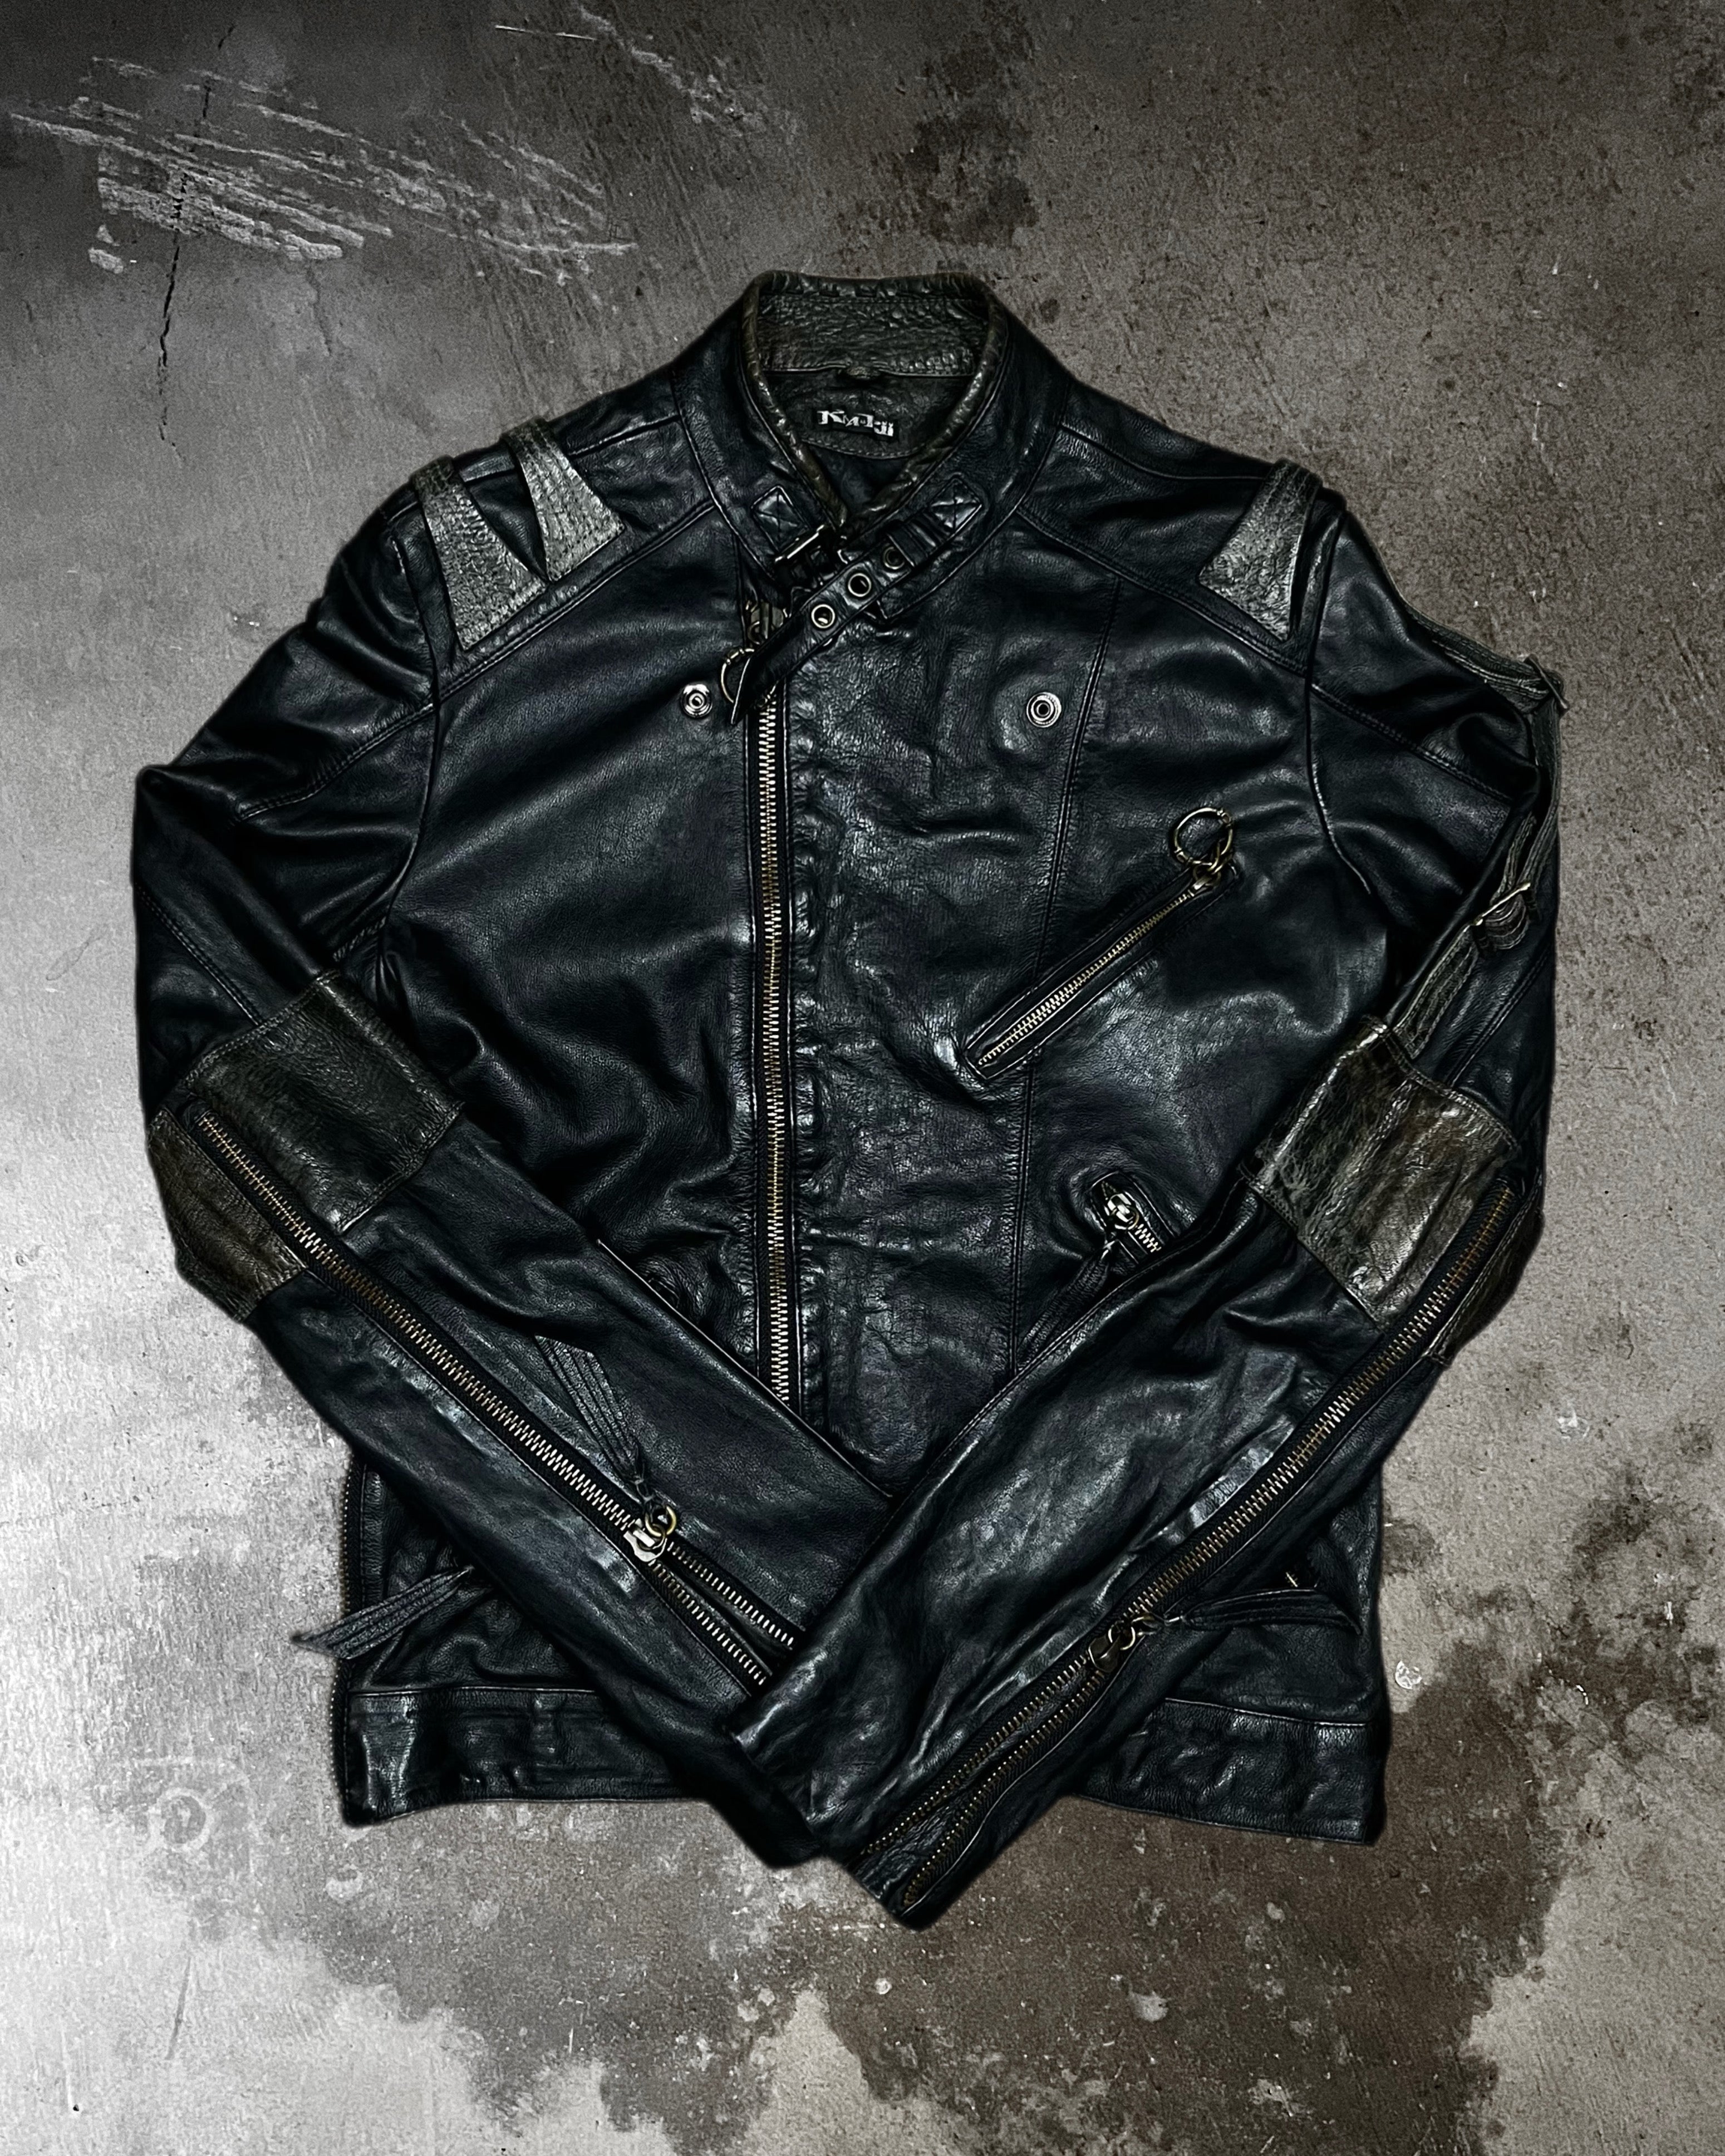 Kmrii 'Dead Rock Orchestra' Leather Jacket